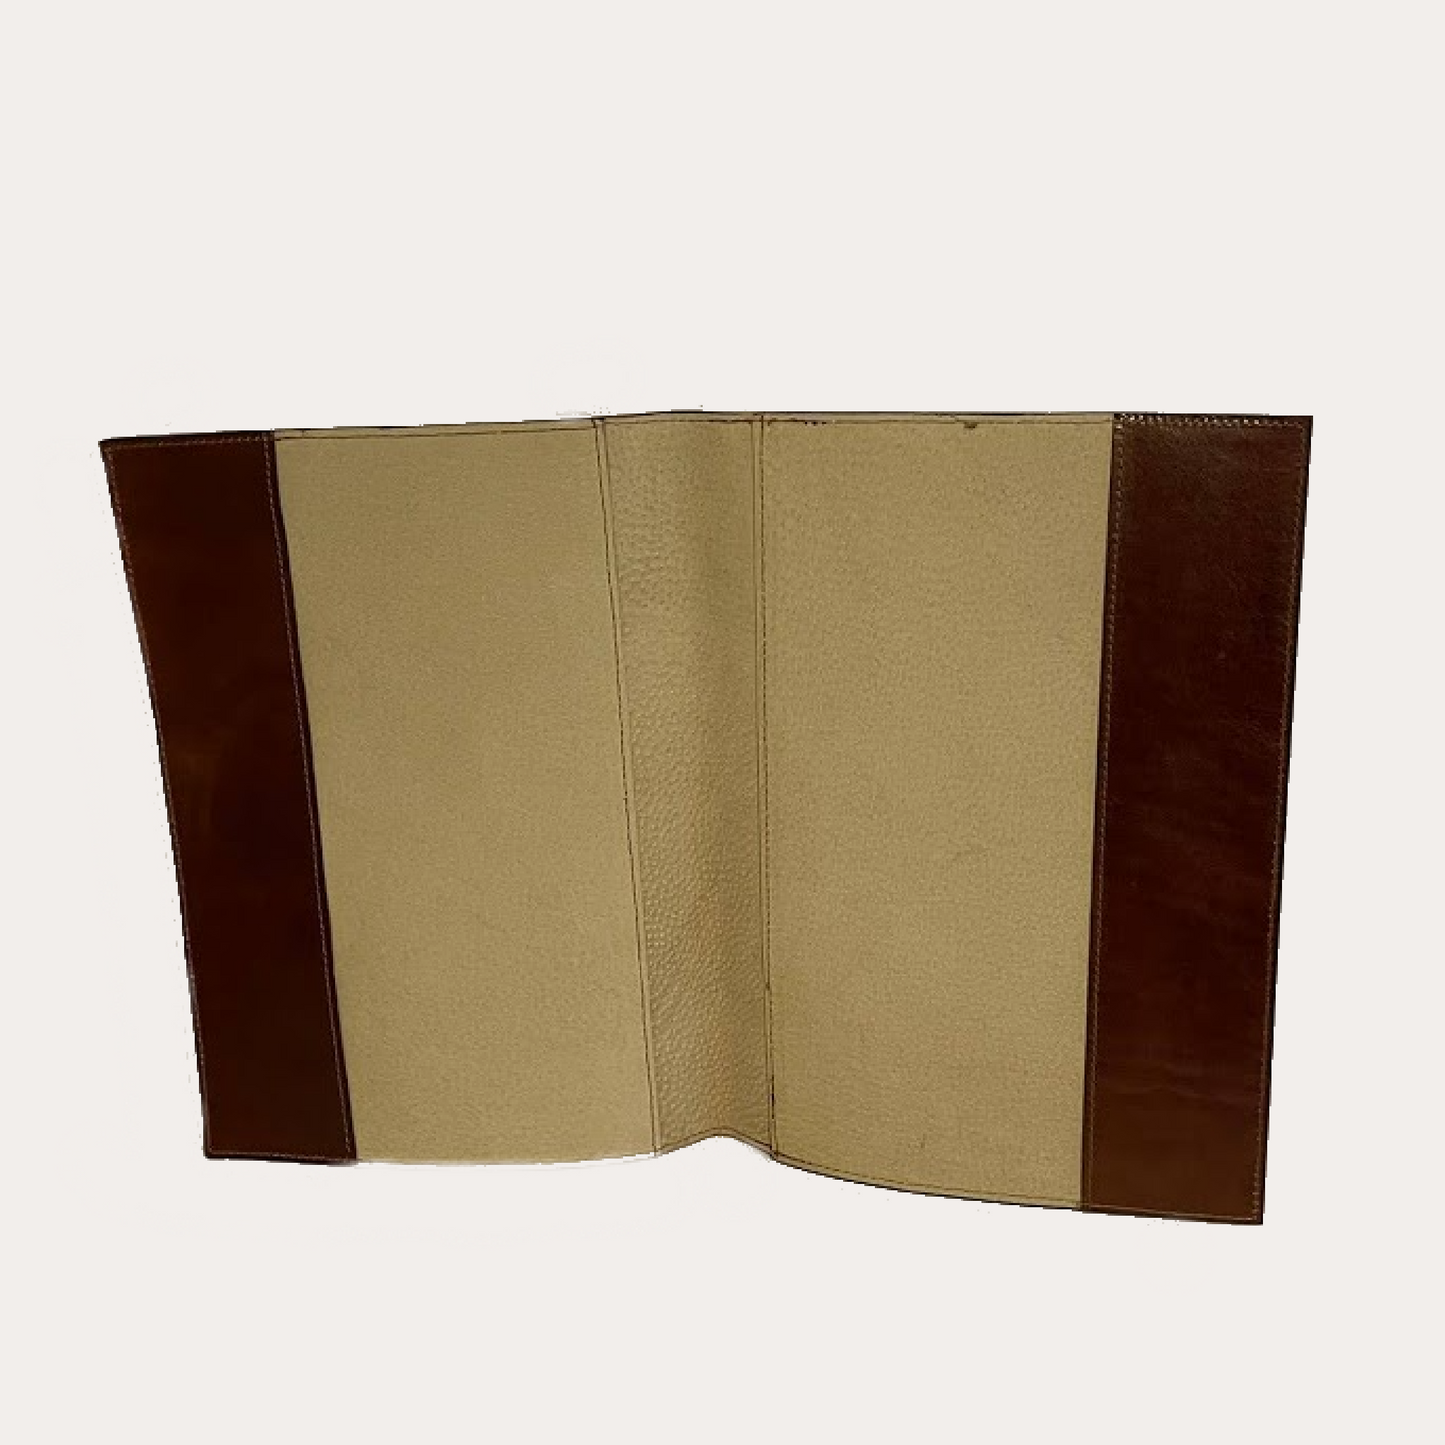 Chiarugi Brown Leather A4 Notebook/Diary Cover